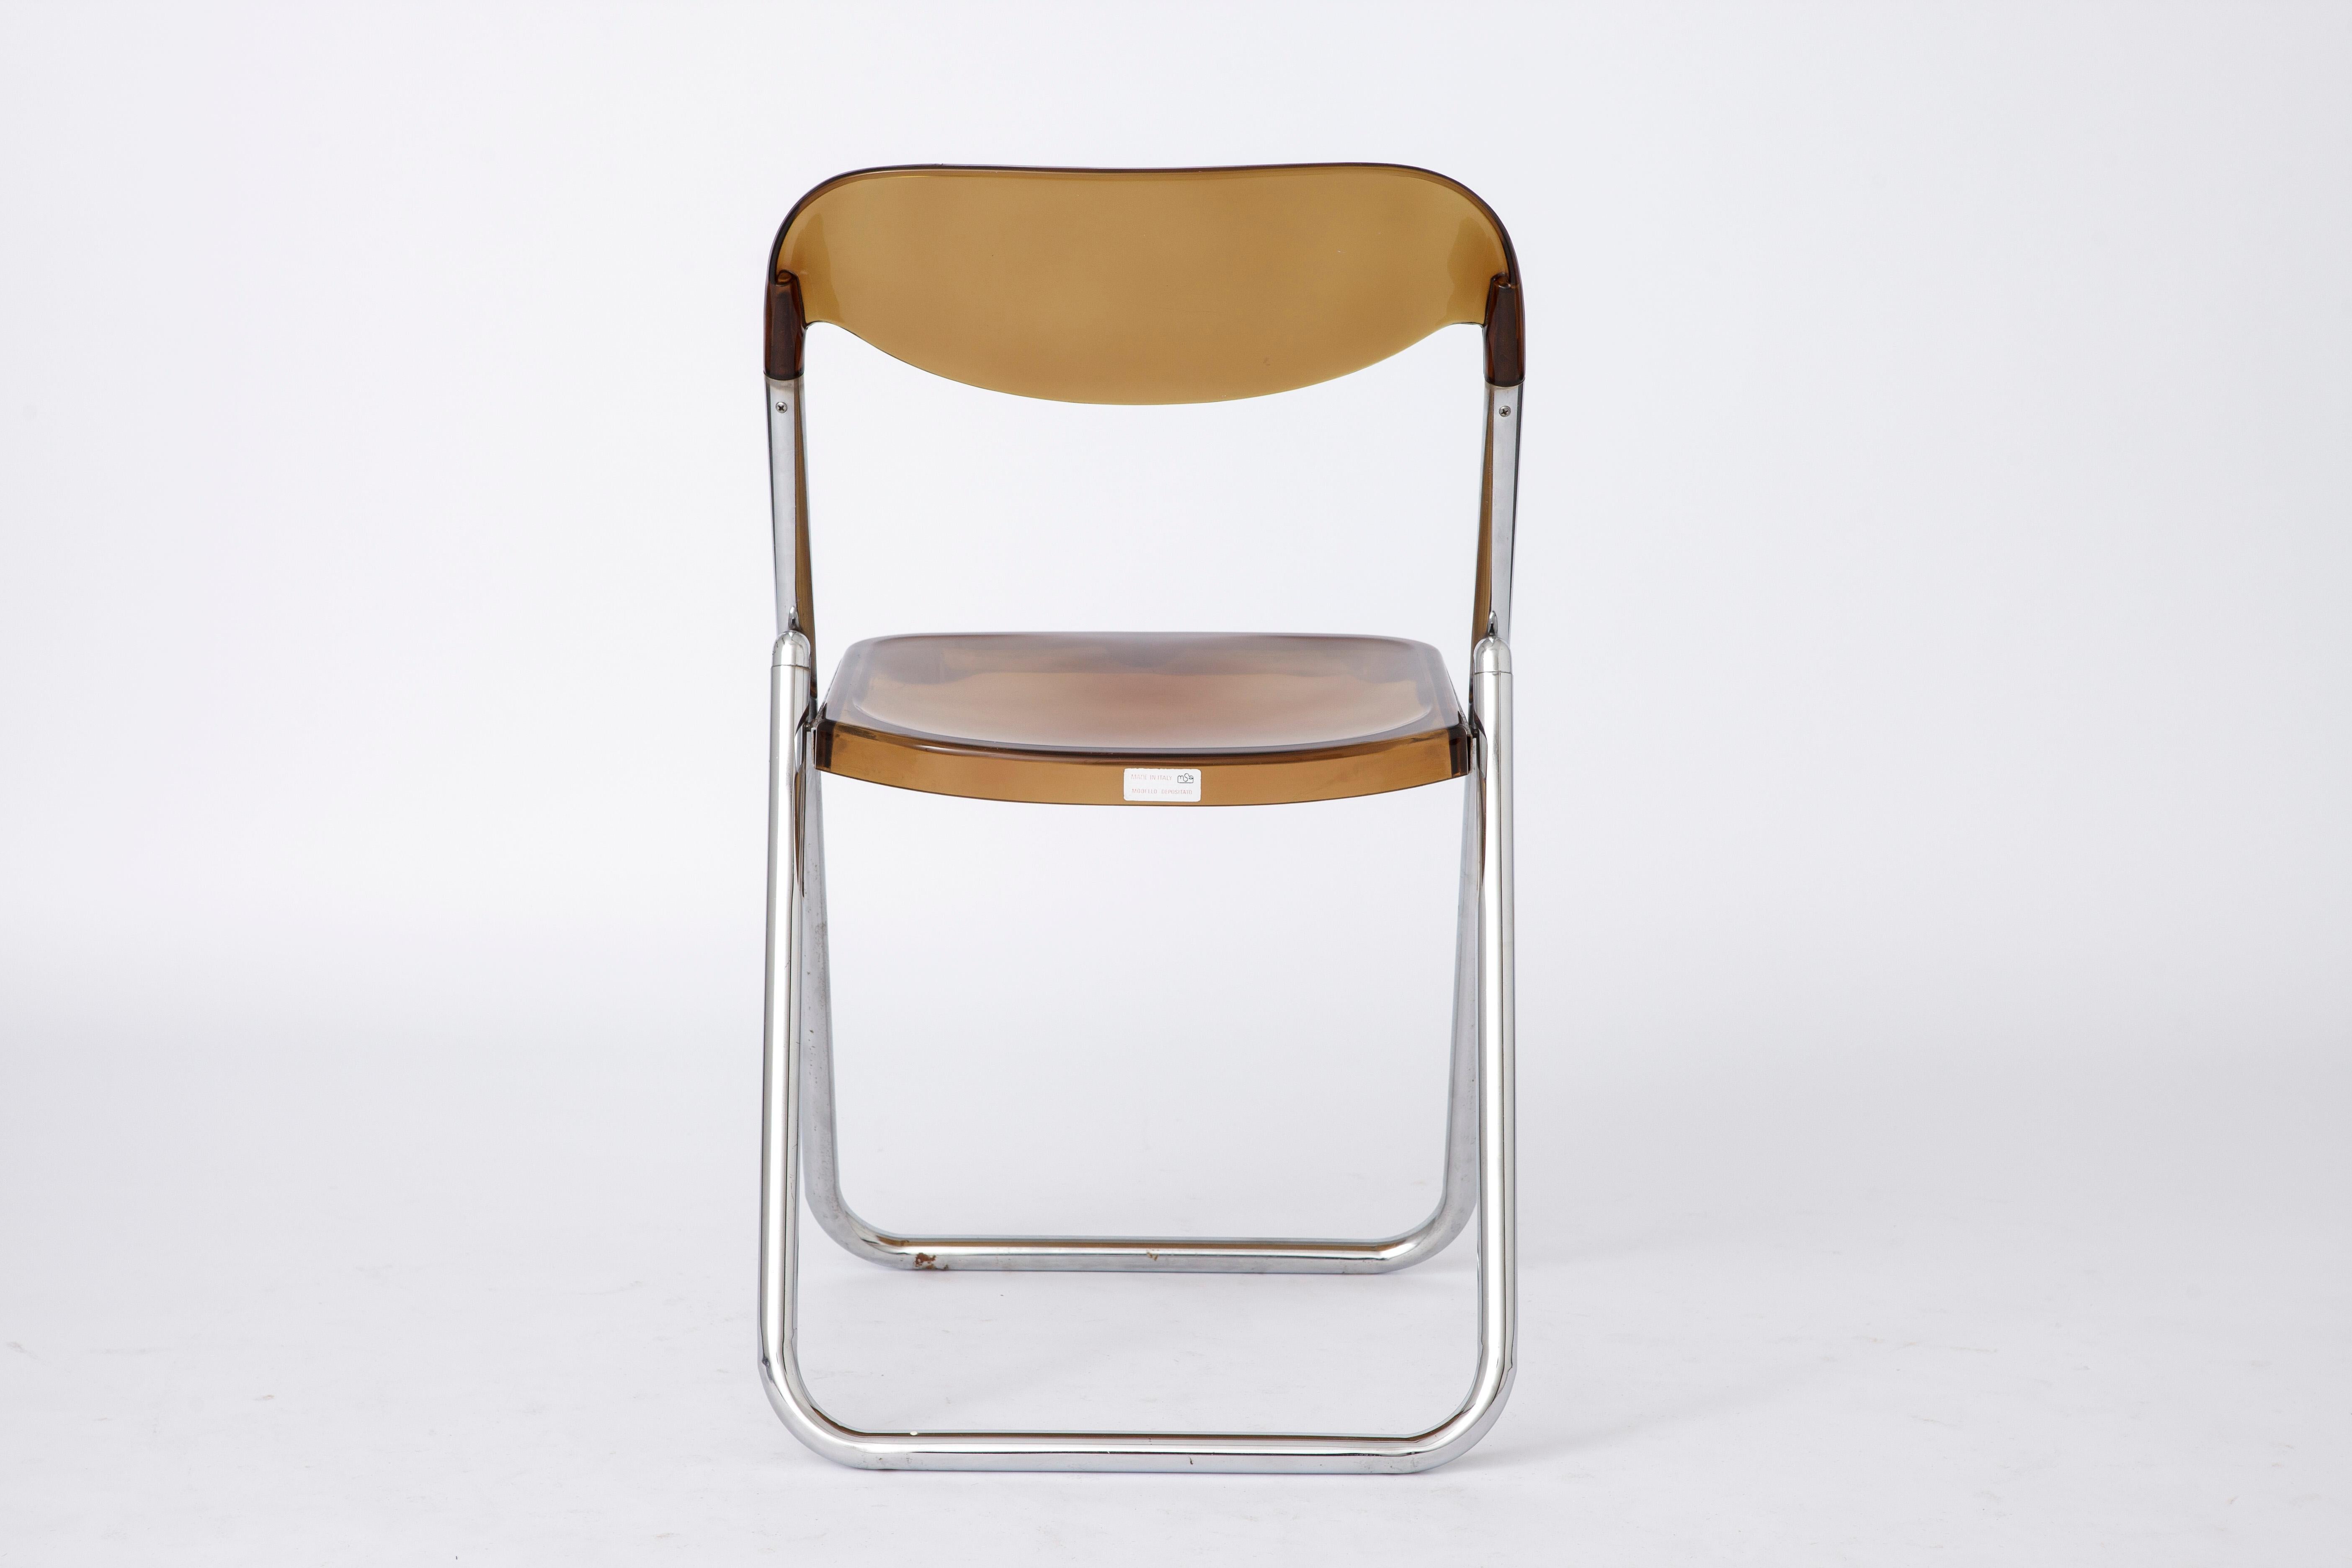 Metal Vintage Folding Chair 1960s-1970s Italy